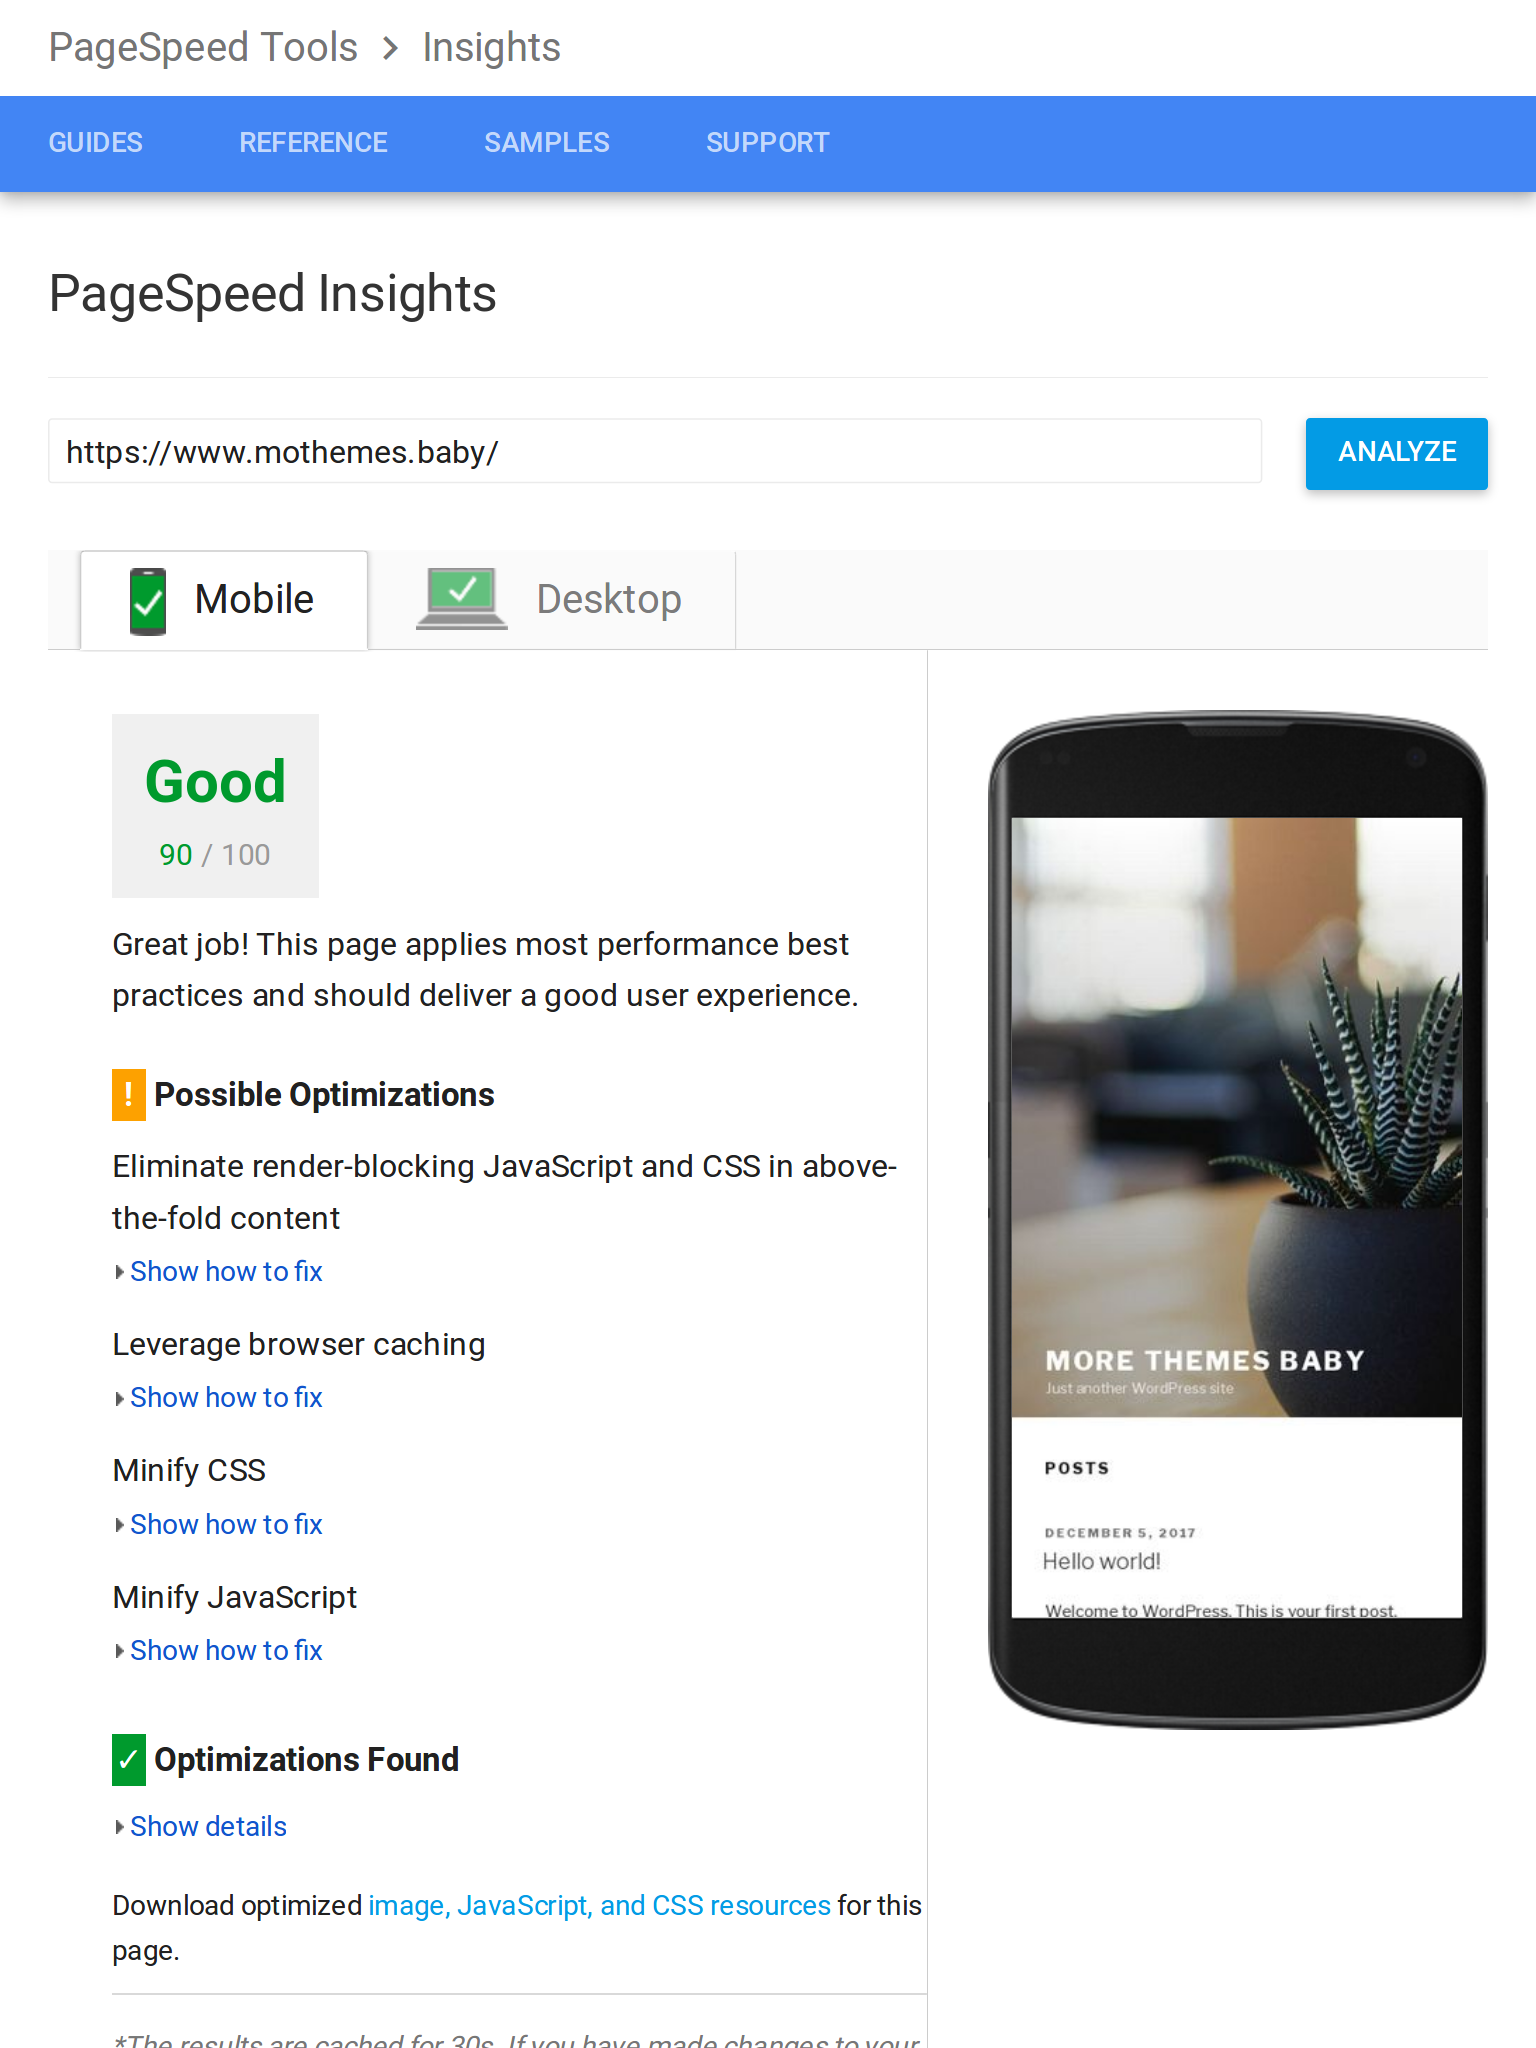 Google PageSpeed Insights after the first install for mobile